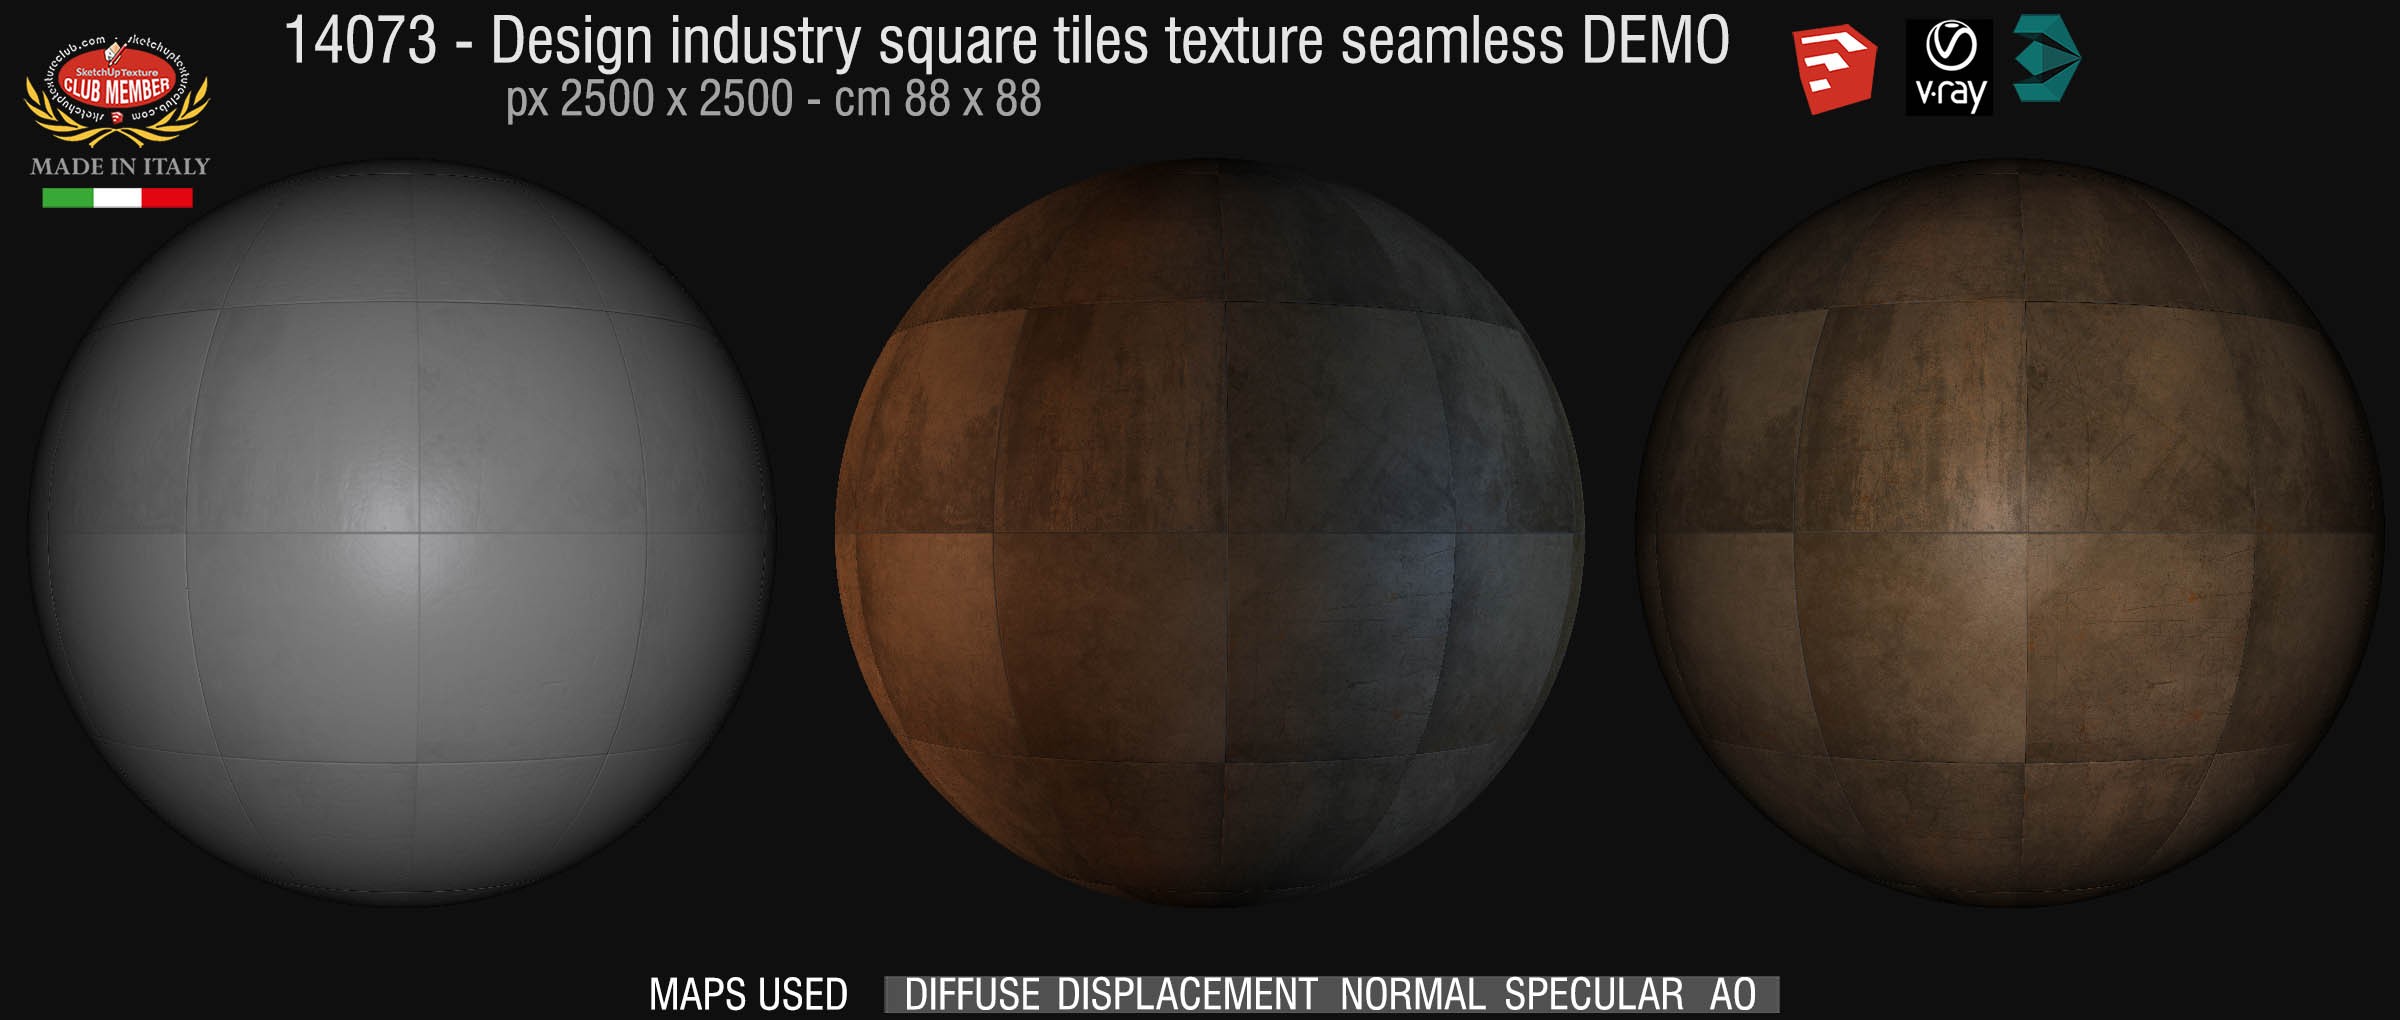 14073 Design industry square tile texture seamless + maps DEMO